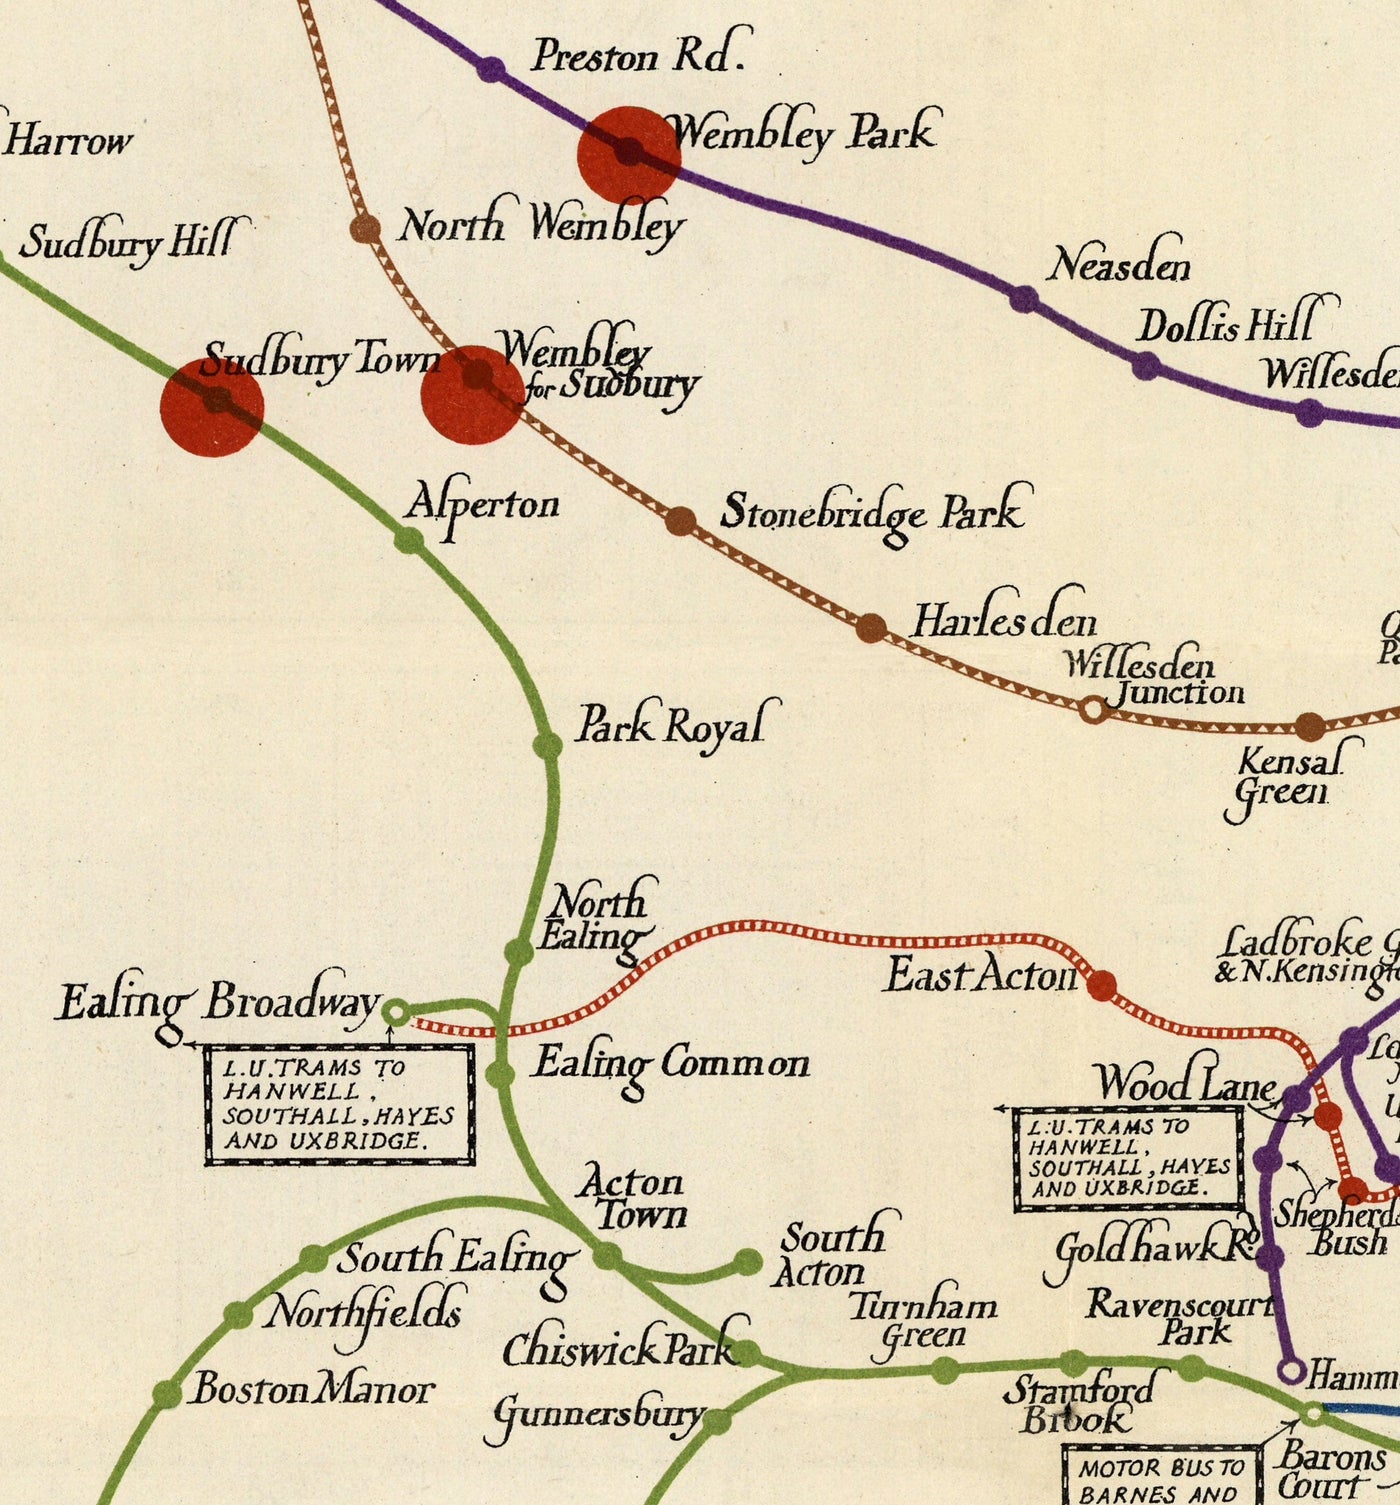 Old London Underground Tube Map, 1923 - Oxford Circus, Piccadilly, Central Line